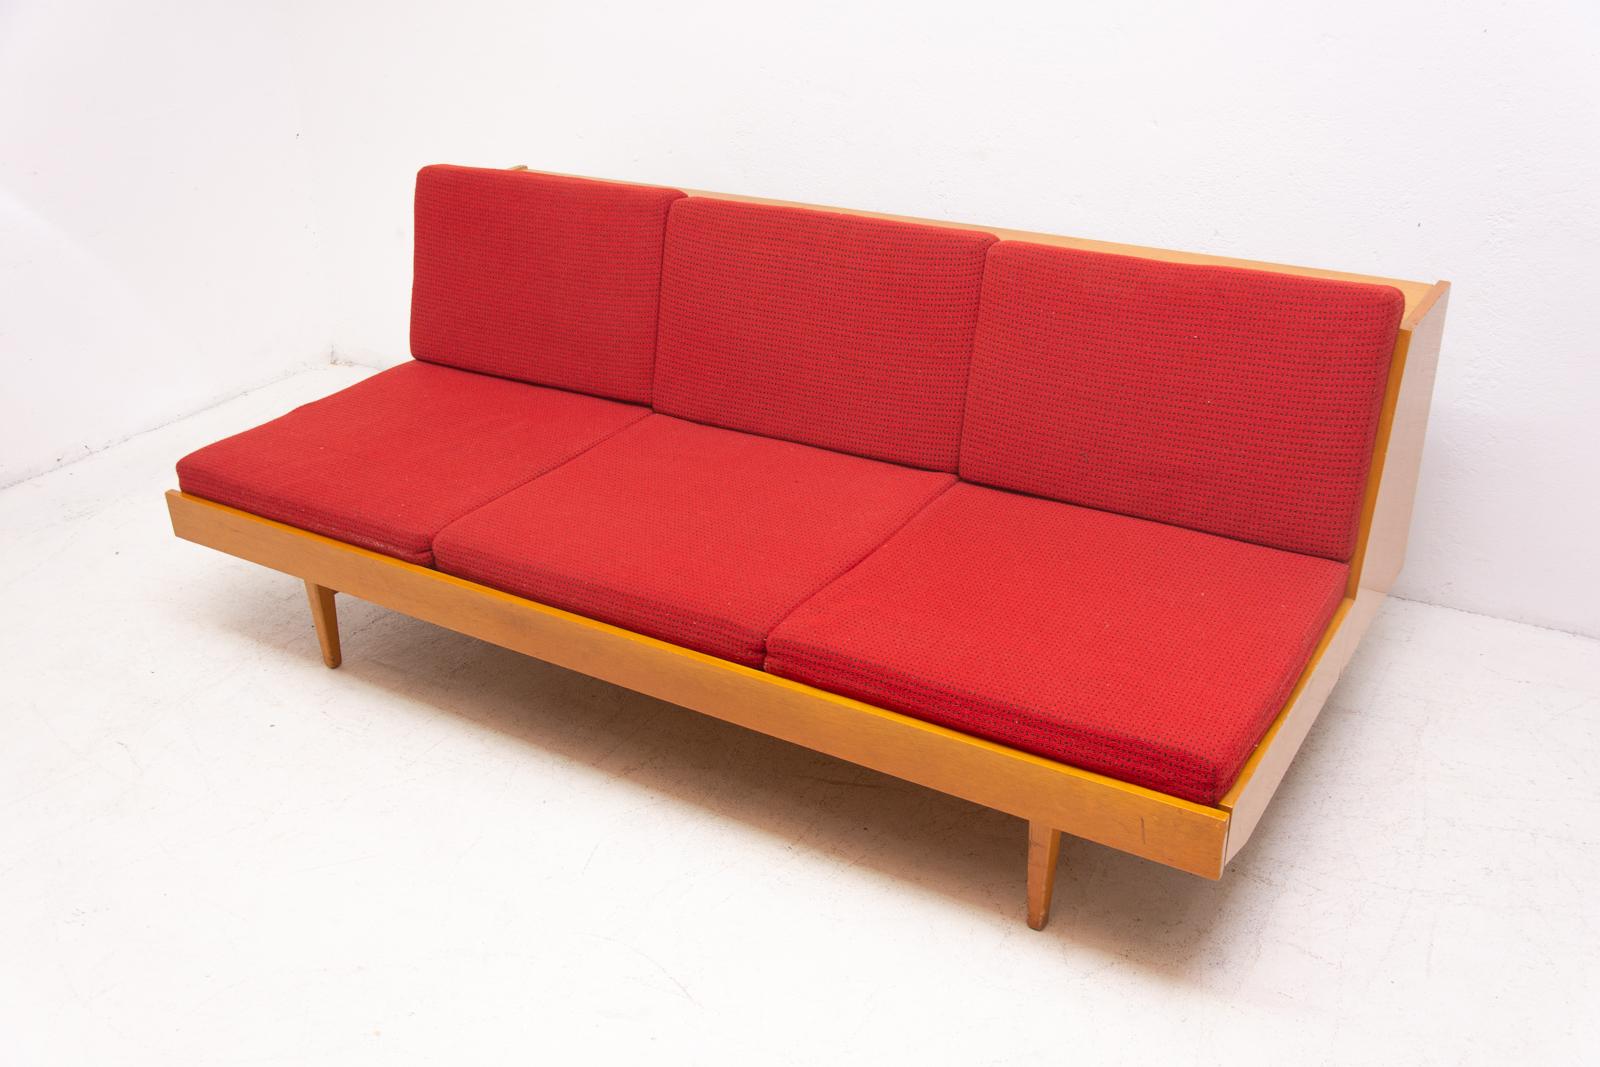 Midcentury sofa bed, made in the former Czechoslovakia in the 1960s. This sofa has a wooden structure, it´s is in good preserved condition, showing signs of age and using.

Measures: Sleeping area: 134 x 192 cm

Seat height: 40 cm.